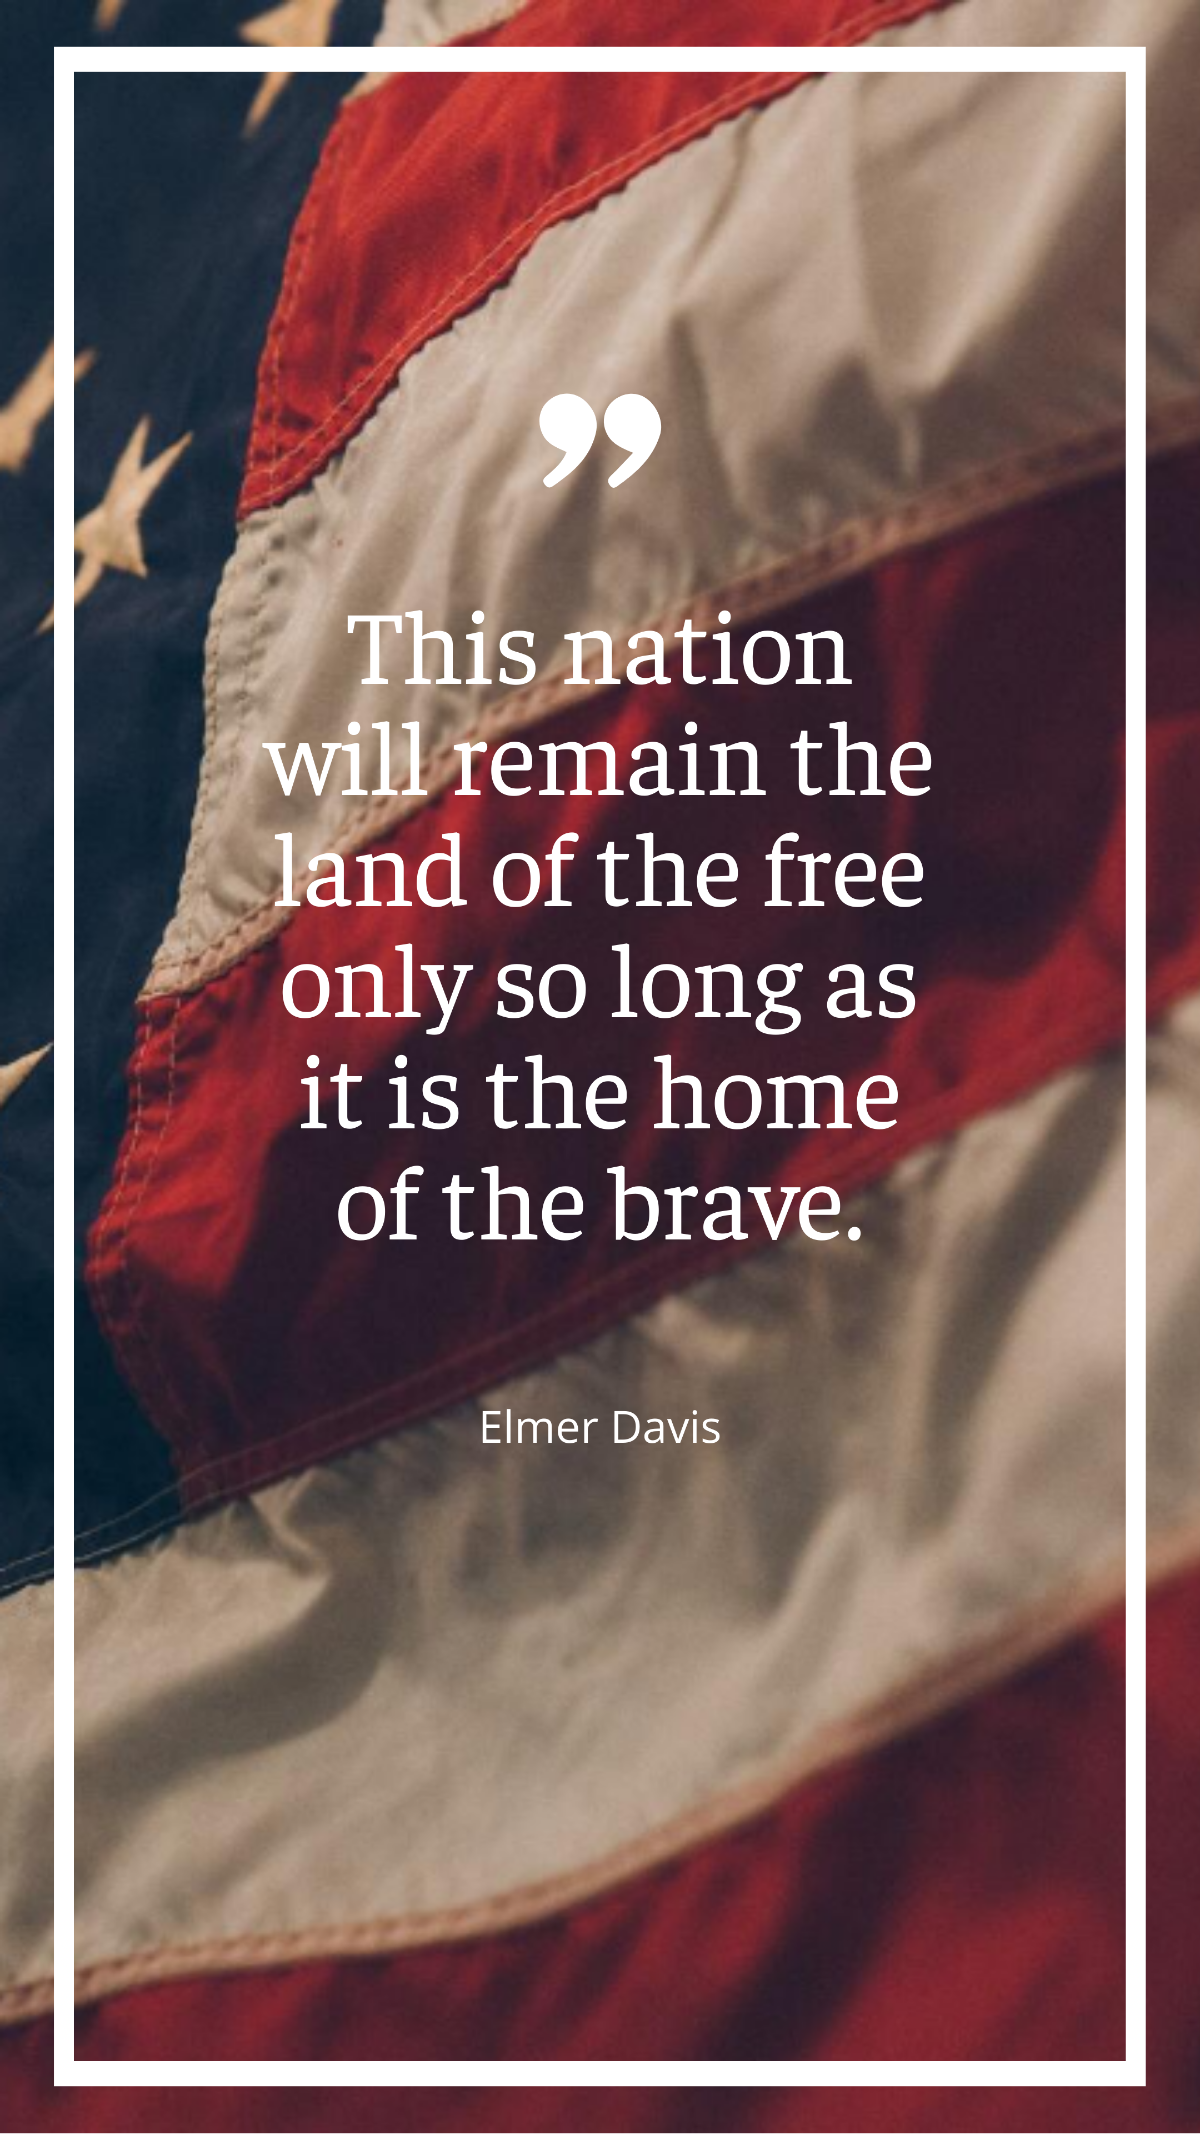 Elmer Davis - “This nation will remain the land of the only so long as it is the home of the brave.”